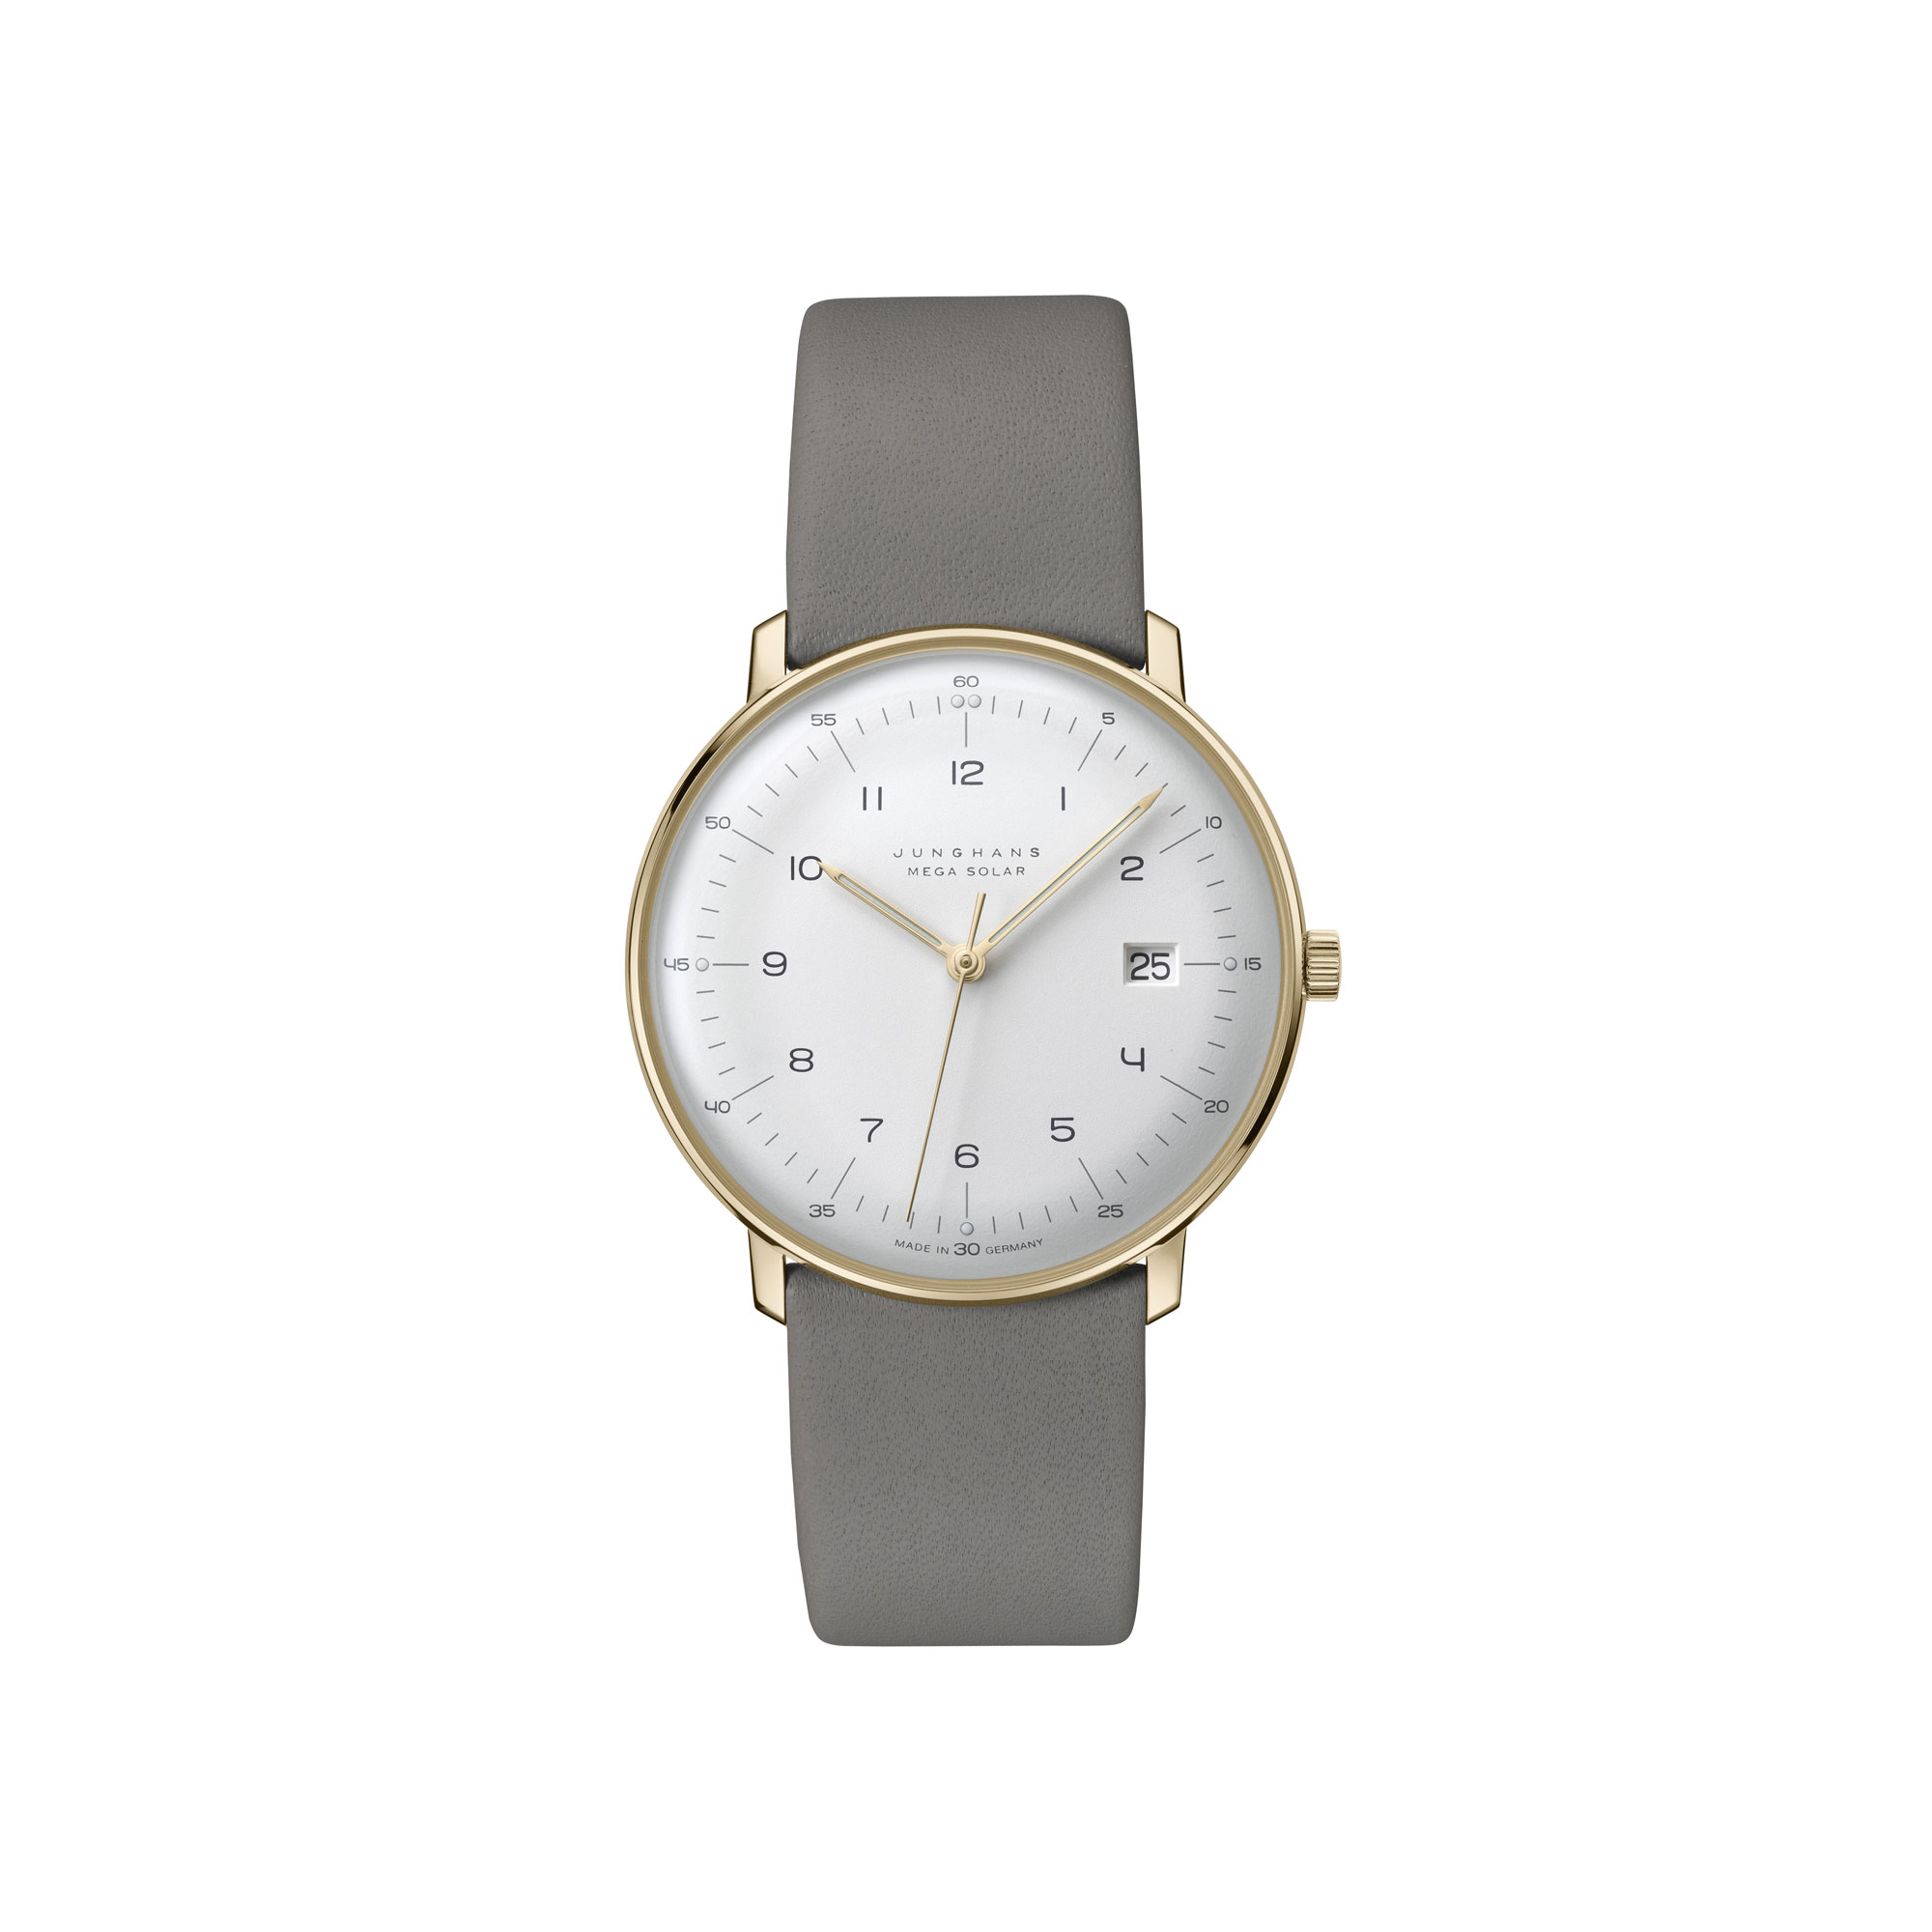 The Junghans Max Bill Solar Watch Collection - Gessato